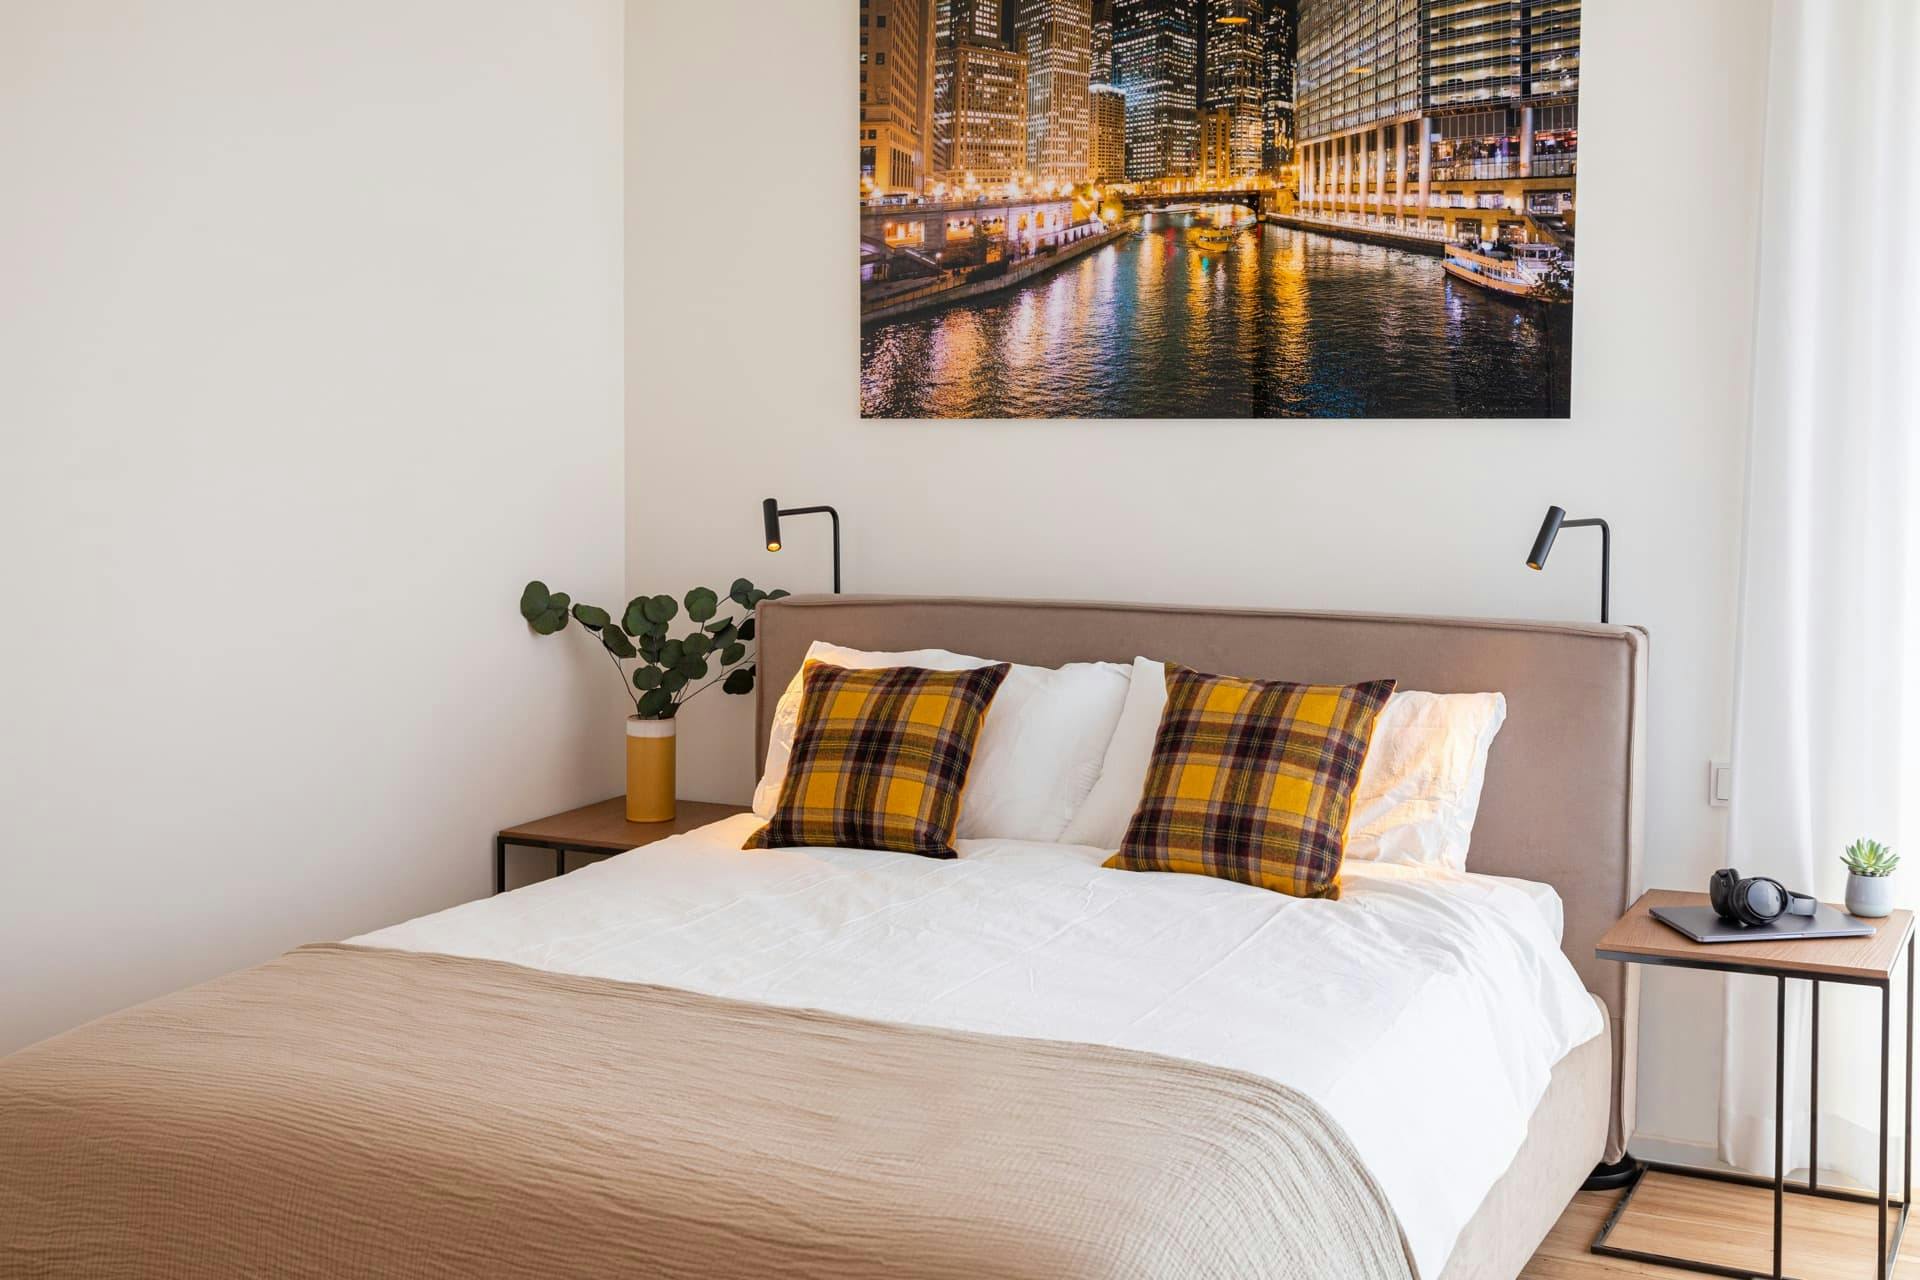 Picture of bed with two lamps and bedside table holding a vase of green foliage. White bedding and mustard tartan cushions on the bed, with a night cityscape photograph hanging on the wall. 